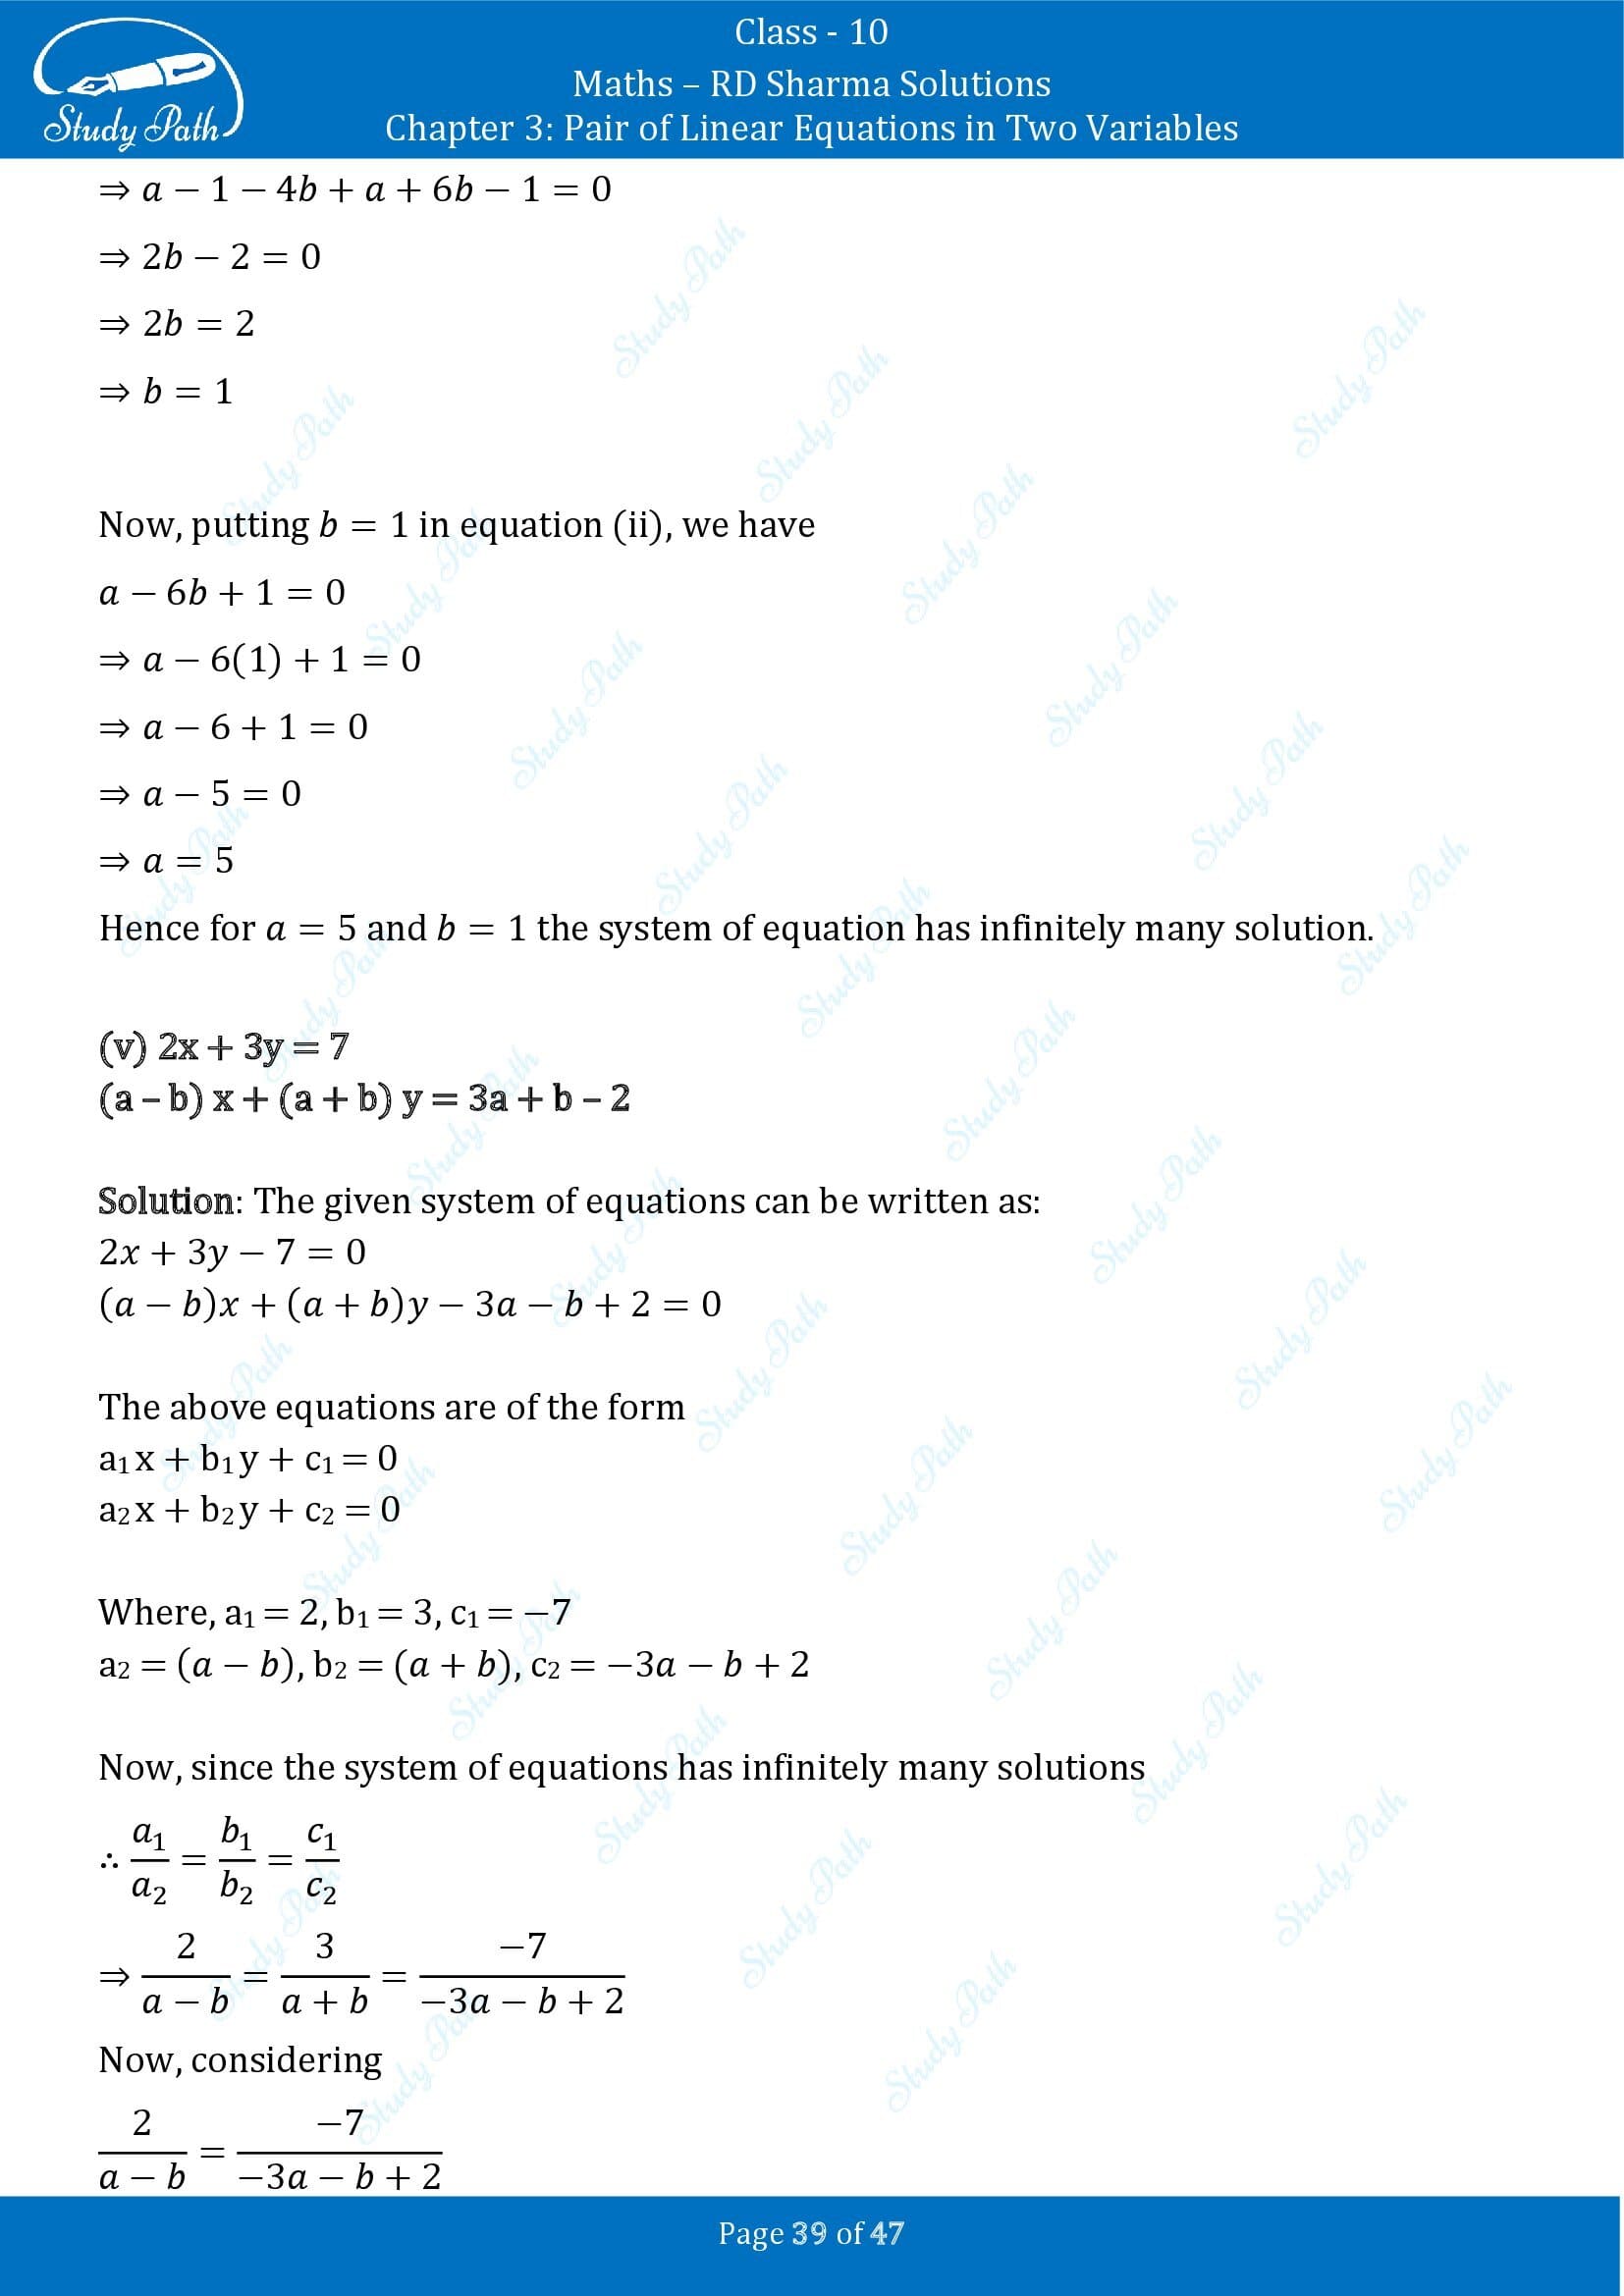 RD Sharma Solutions Class 10 Chapter 3 Pair of Linear Equations in Two Variables Exercise 3.5 00039